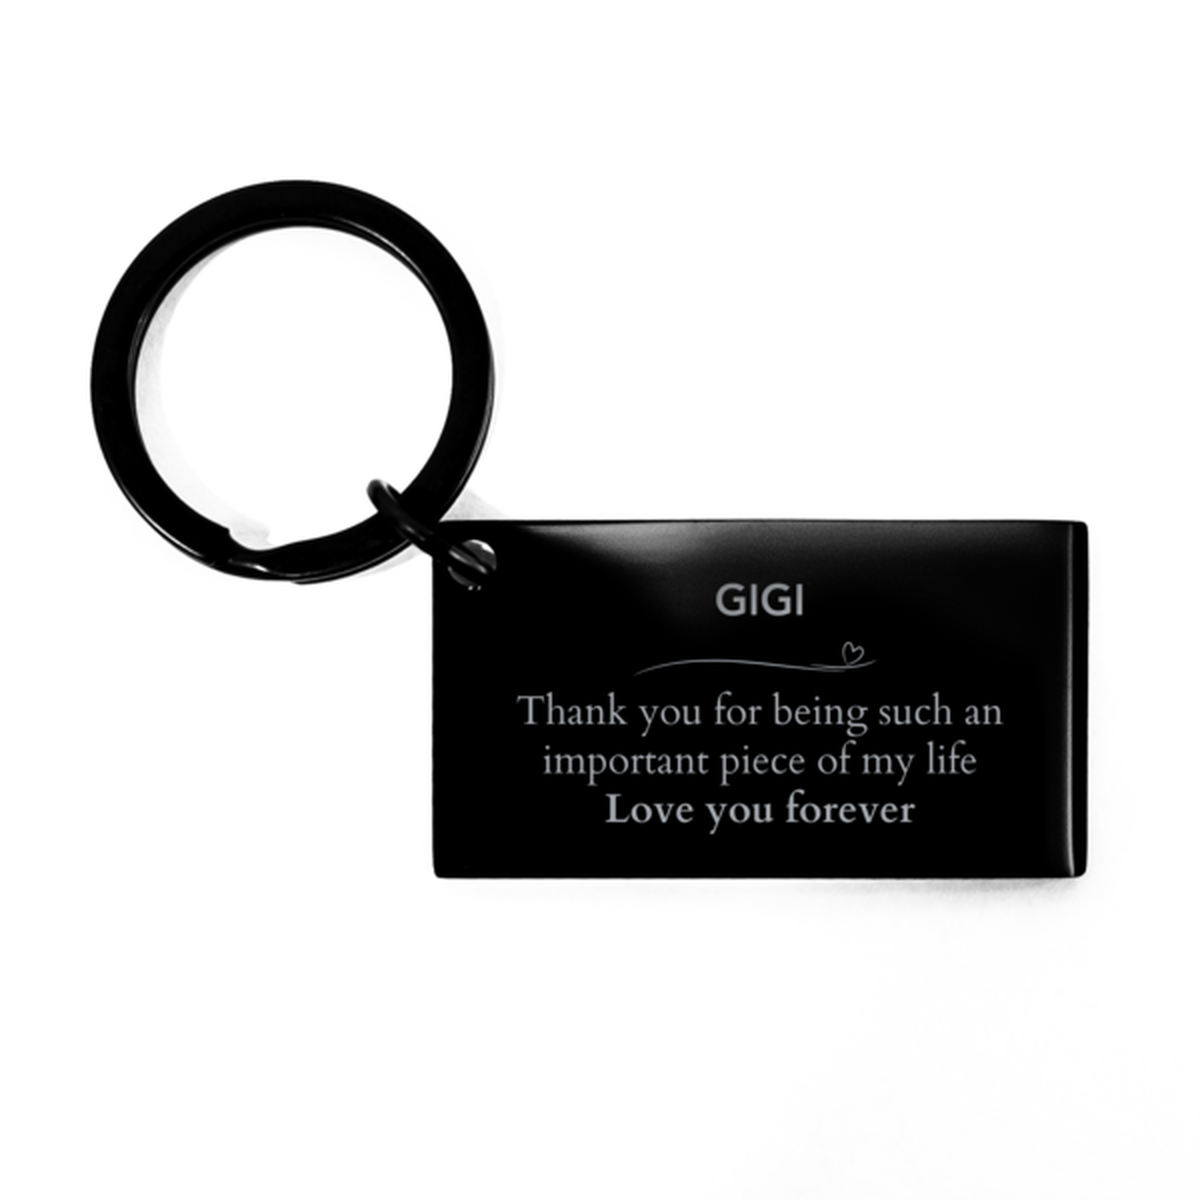 Appropriate Gigi Keychain Epic Birthday Gifts for Gigi Thank you for being such an important piece of my life Gigi Christmas Mothers Fathers Day